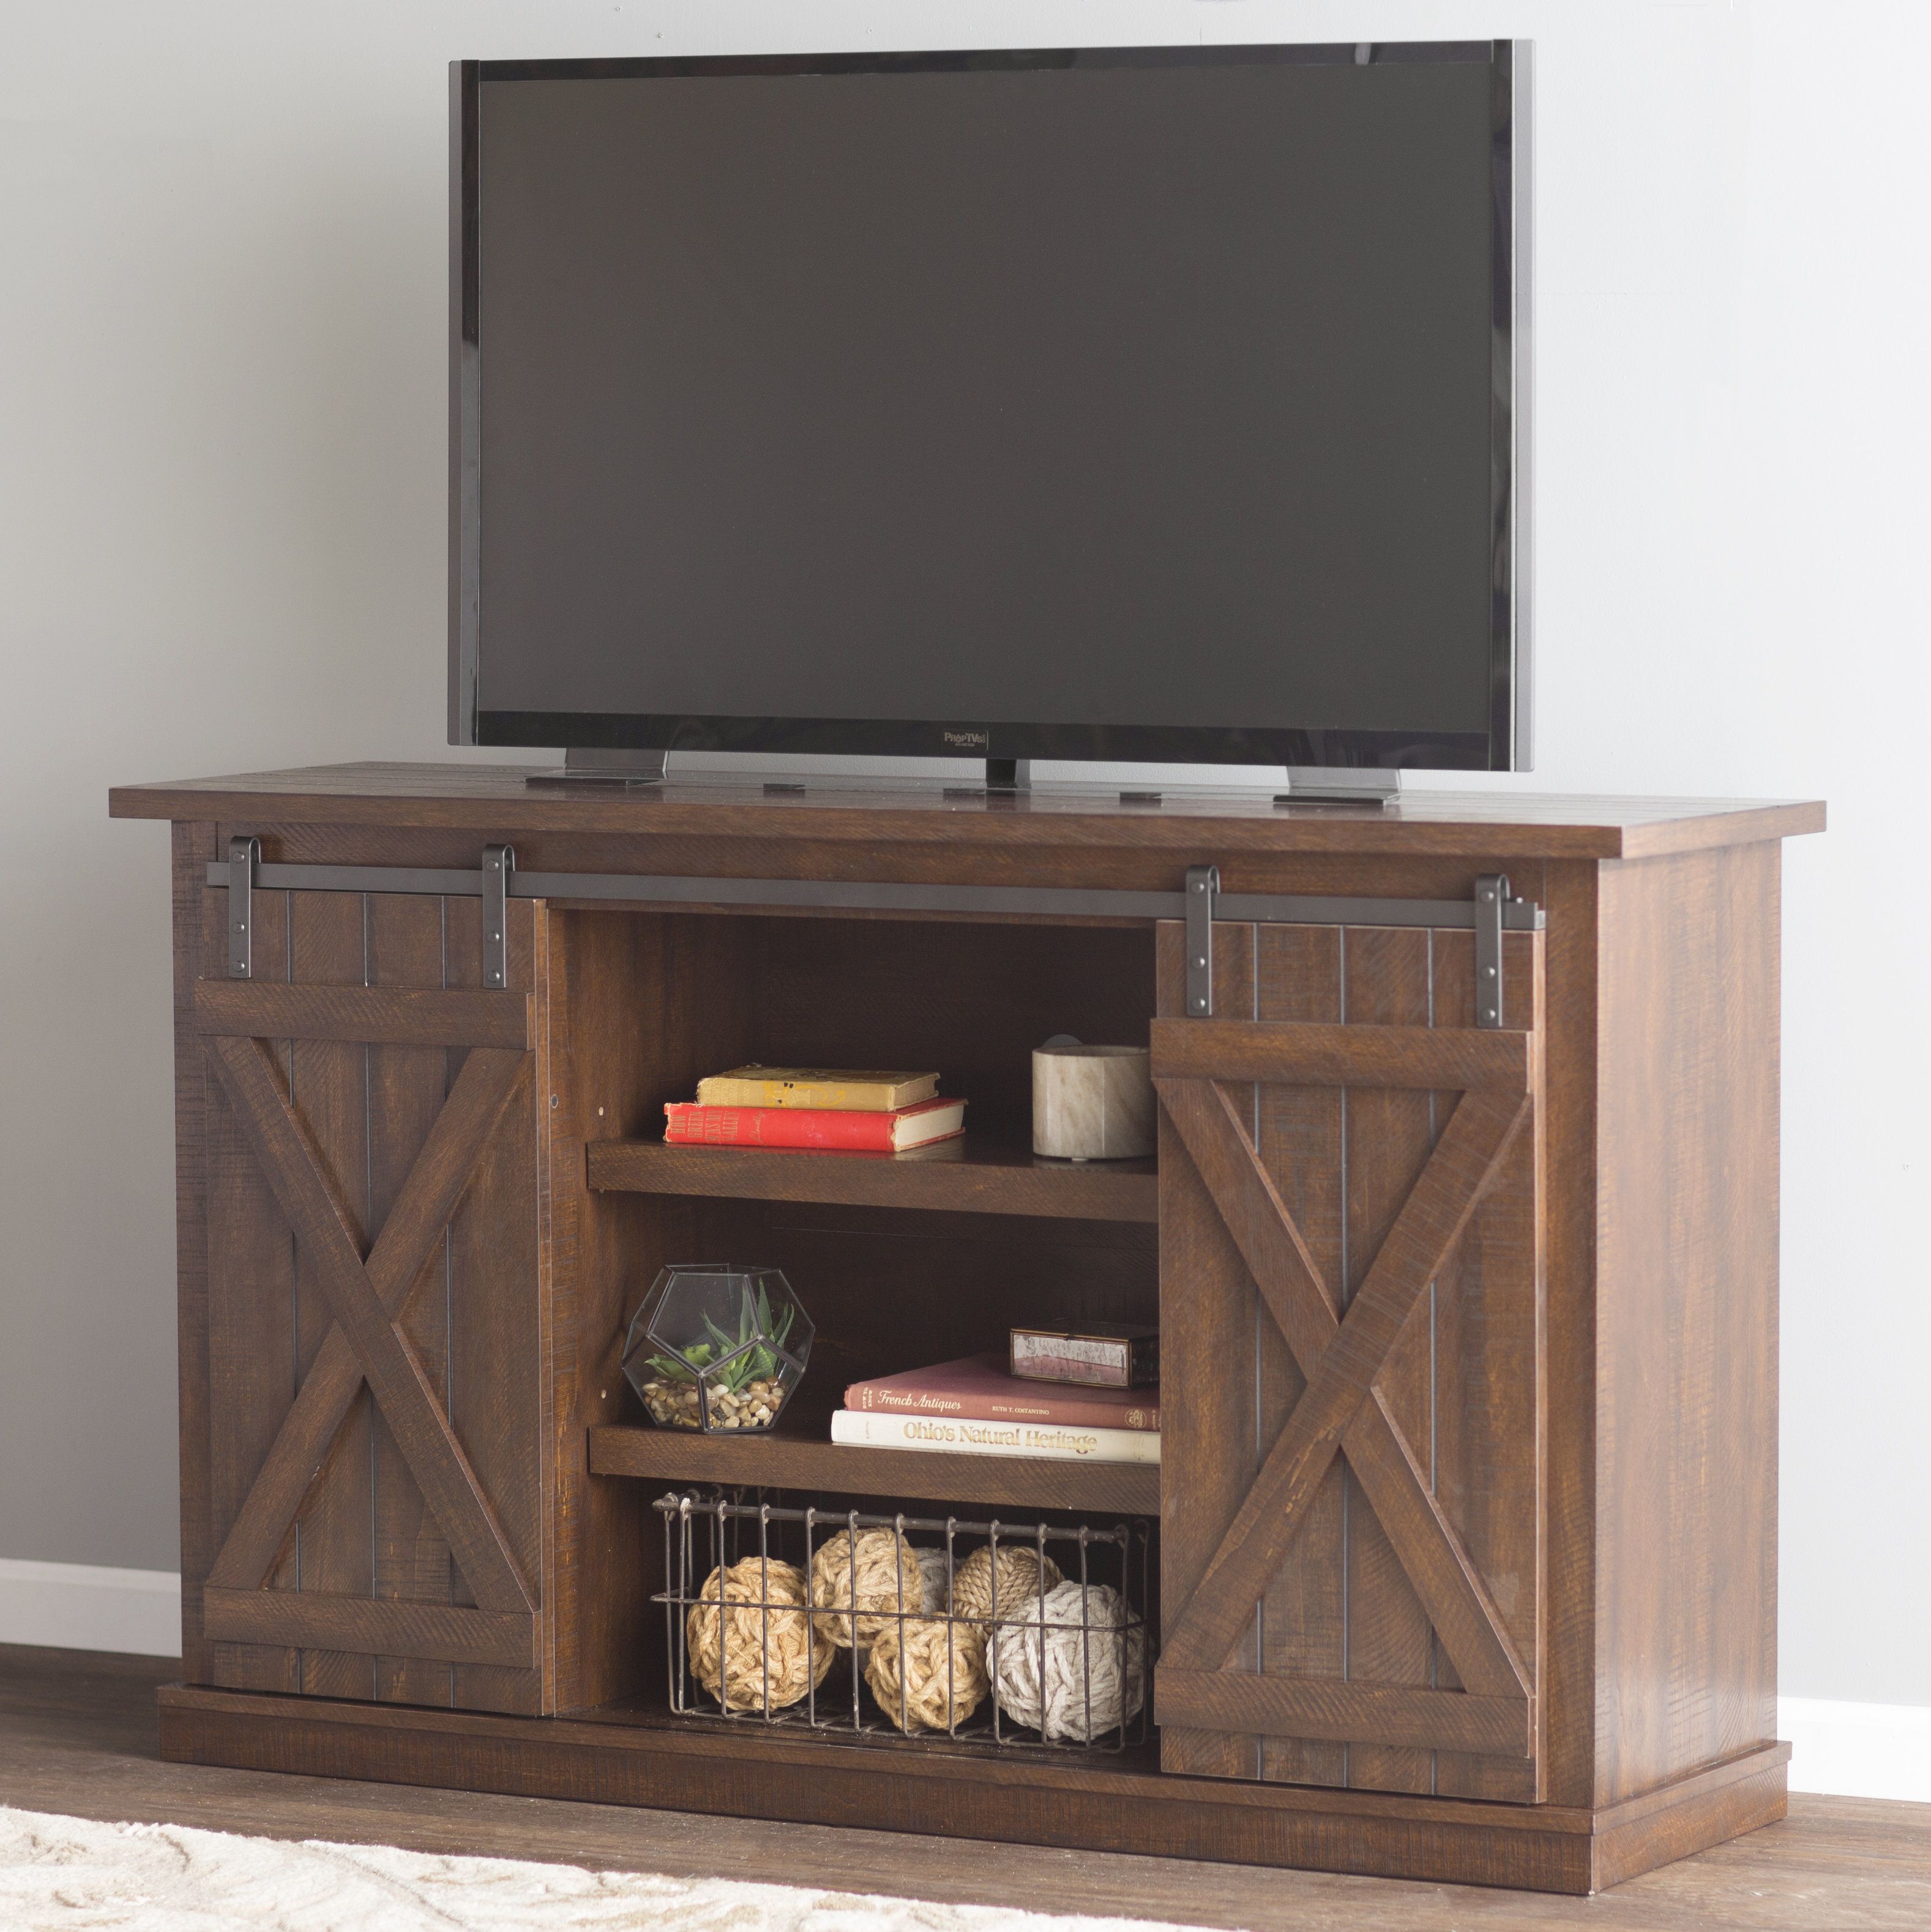 Loon Peak Bluestone Tv Stand For Tvs Up To 60" & Reviews | Wayfair With Vista 60 Inch Tv Stands (View 1 of 30)